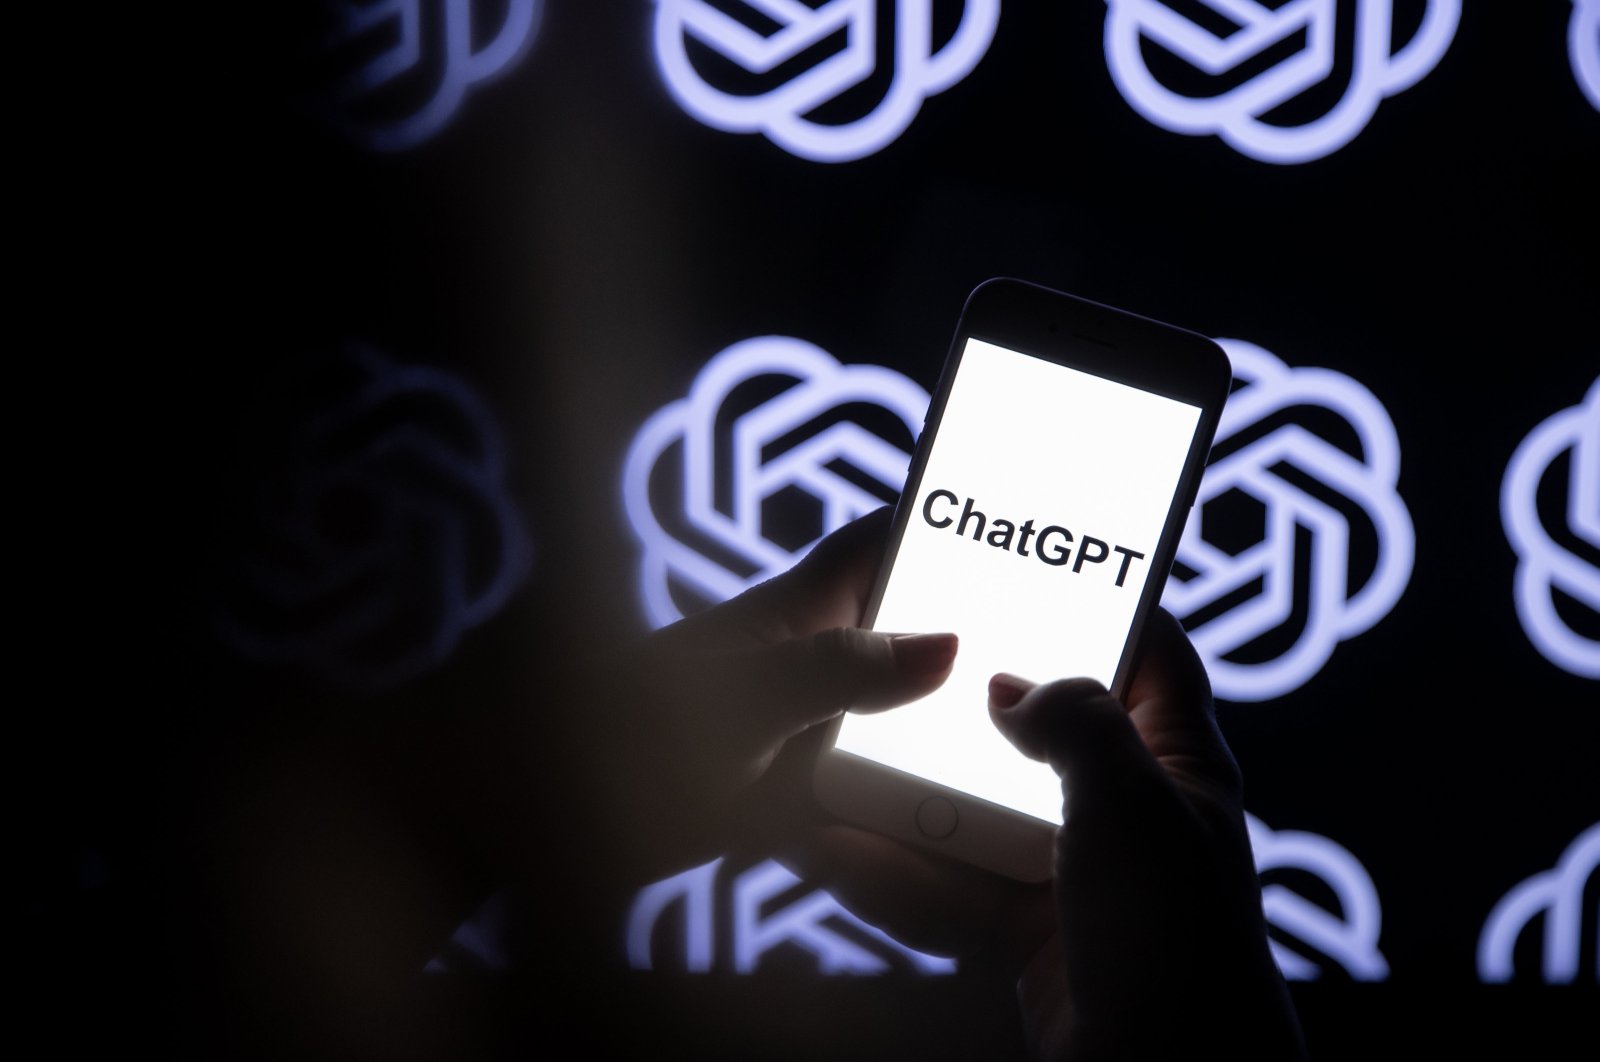 ChatGPT logo is seen on the screen of a mobile phone in this photo taken on Sept. 5, 2023. (AA Photo)